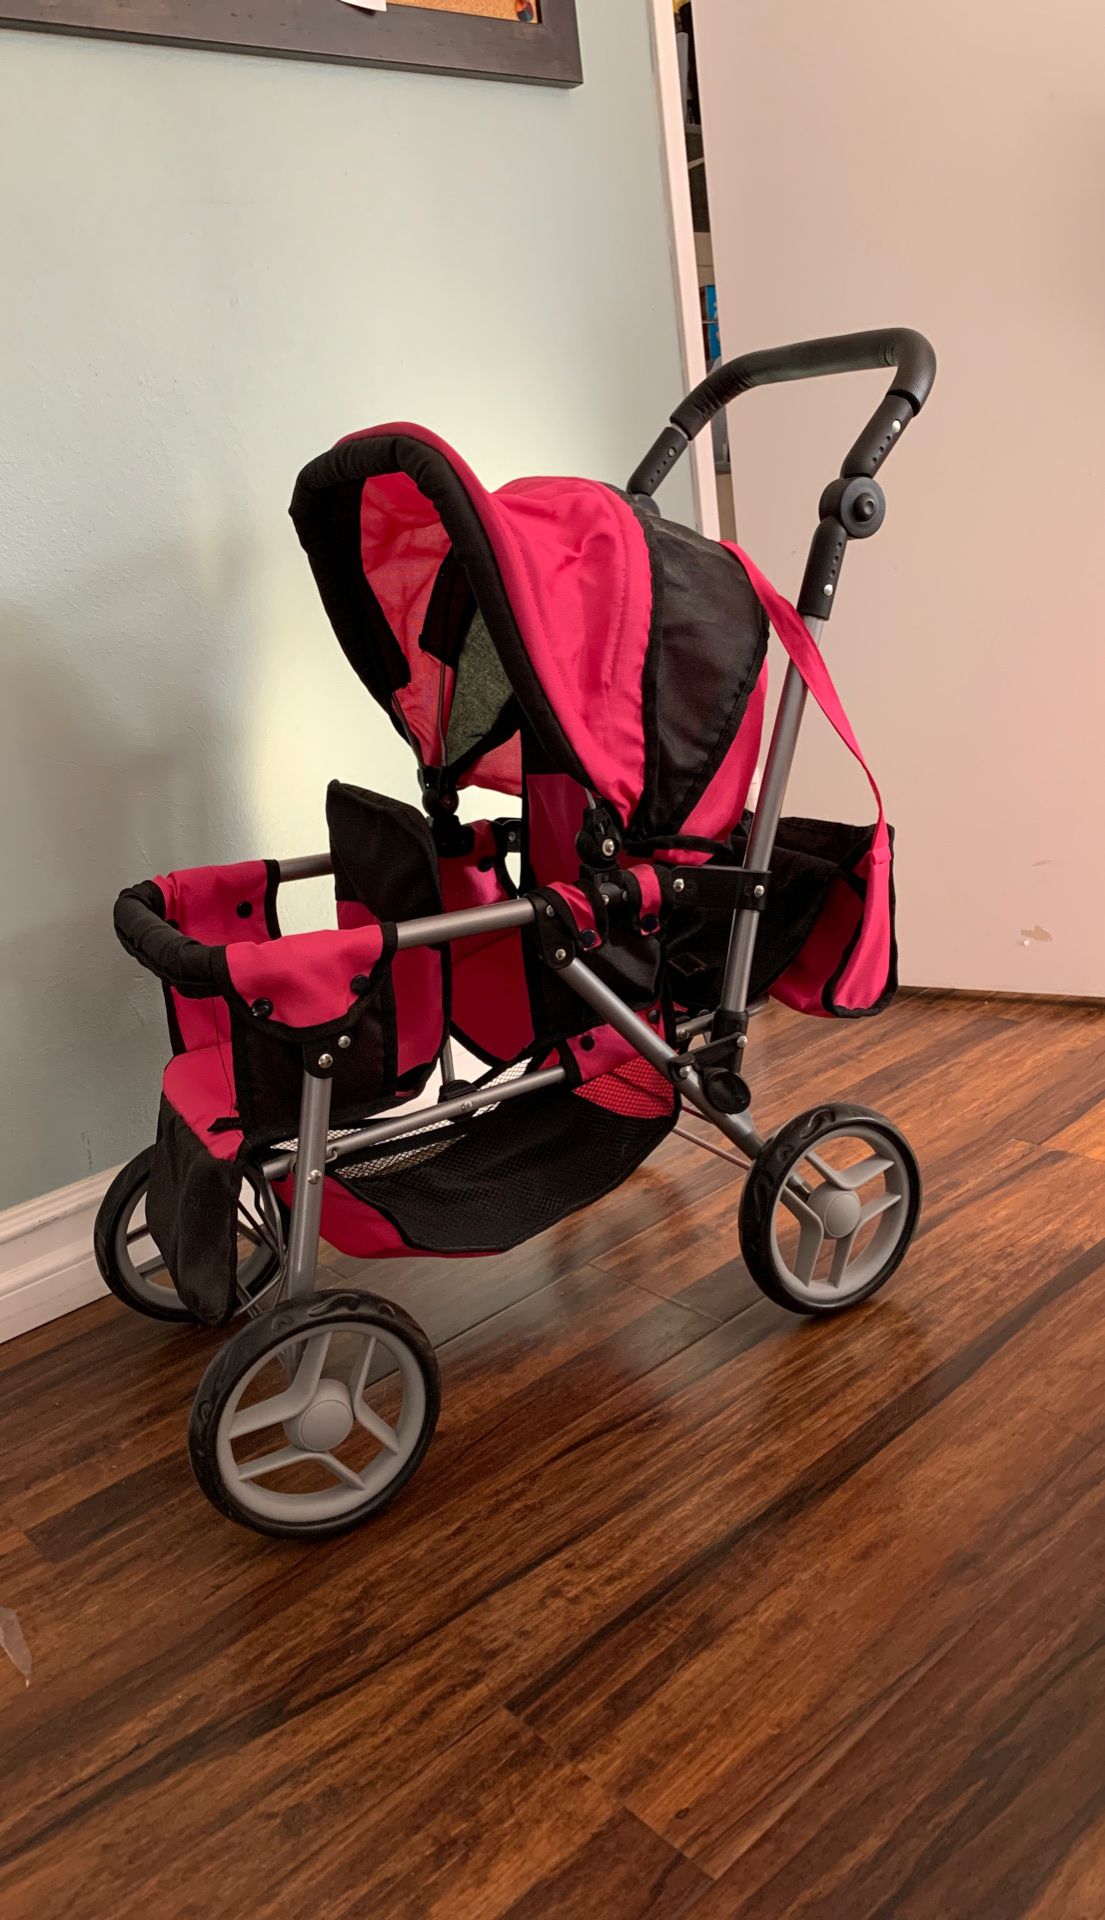 Toy double stroller - Christmas gift idea